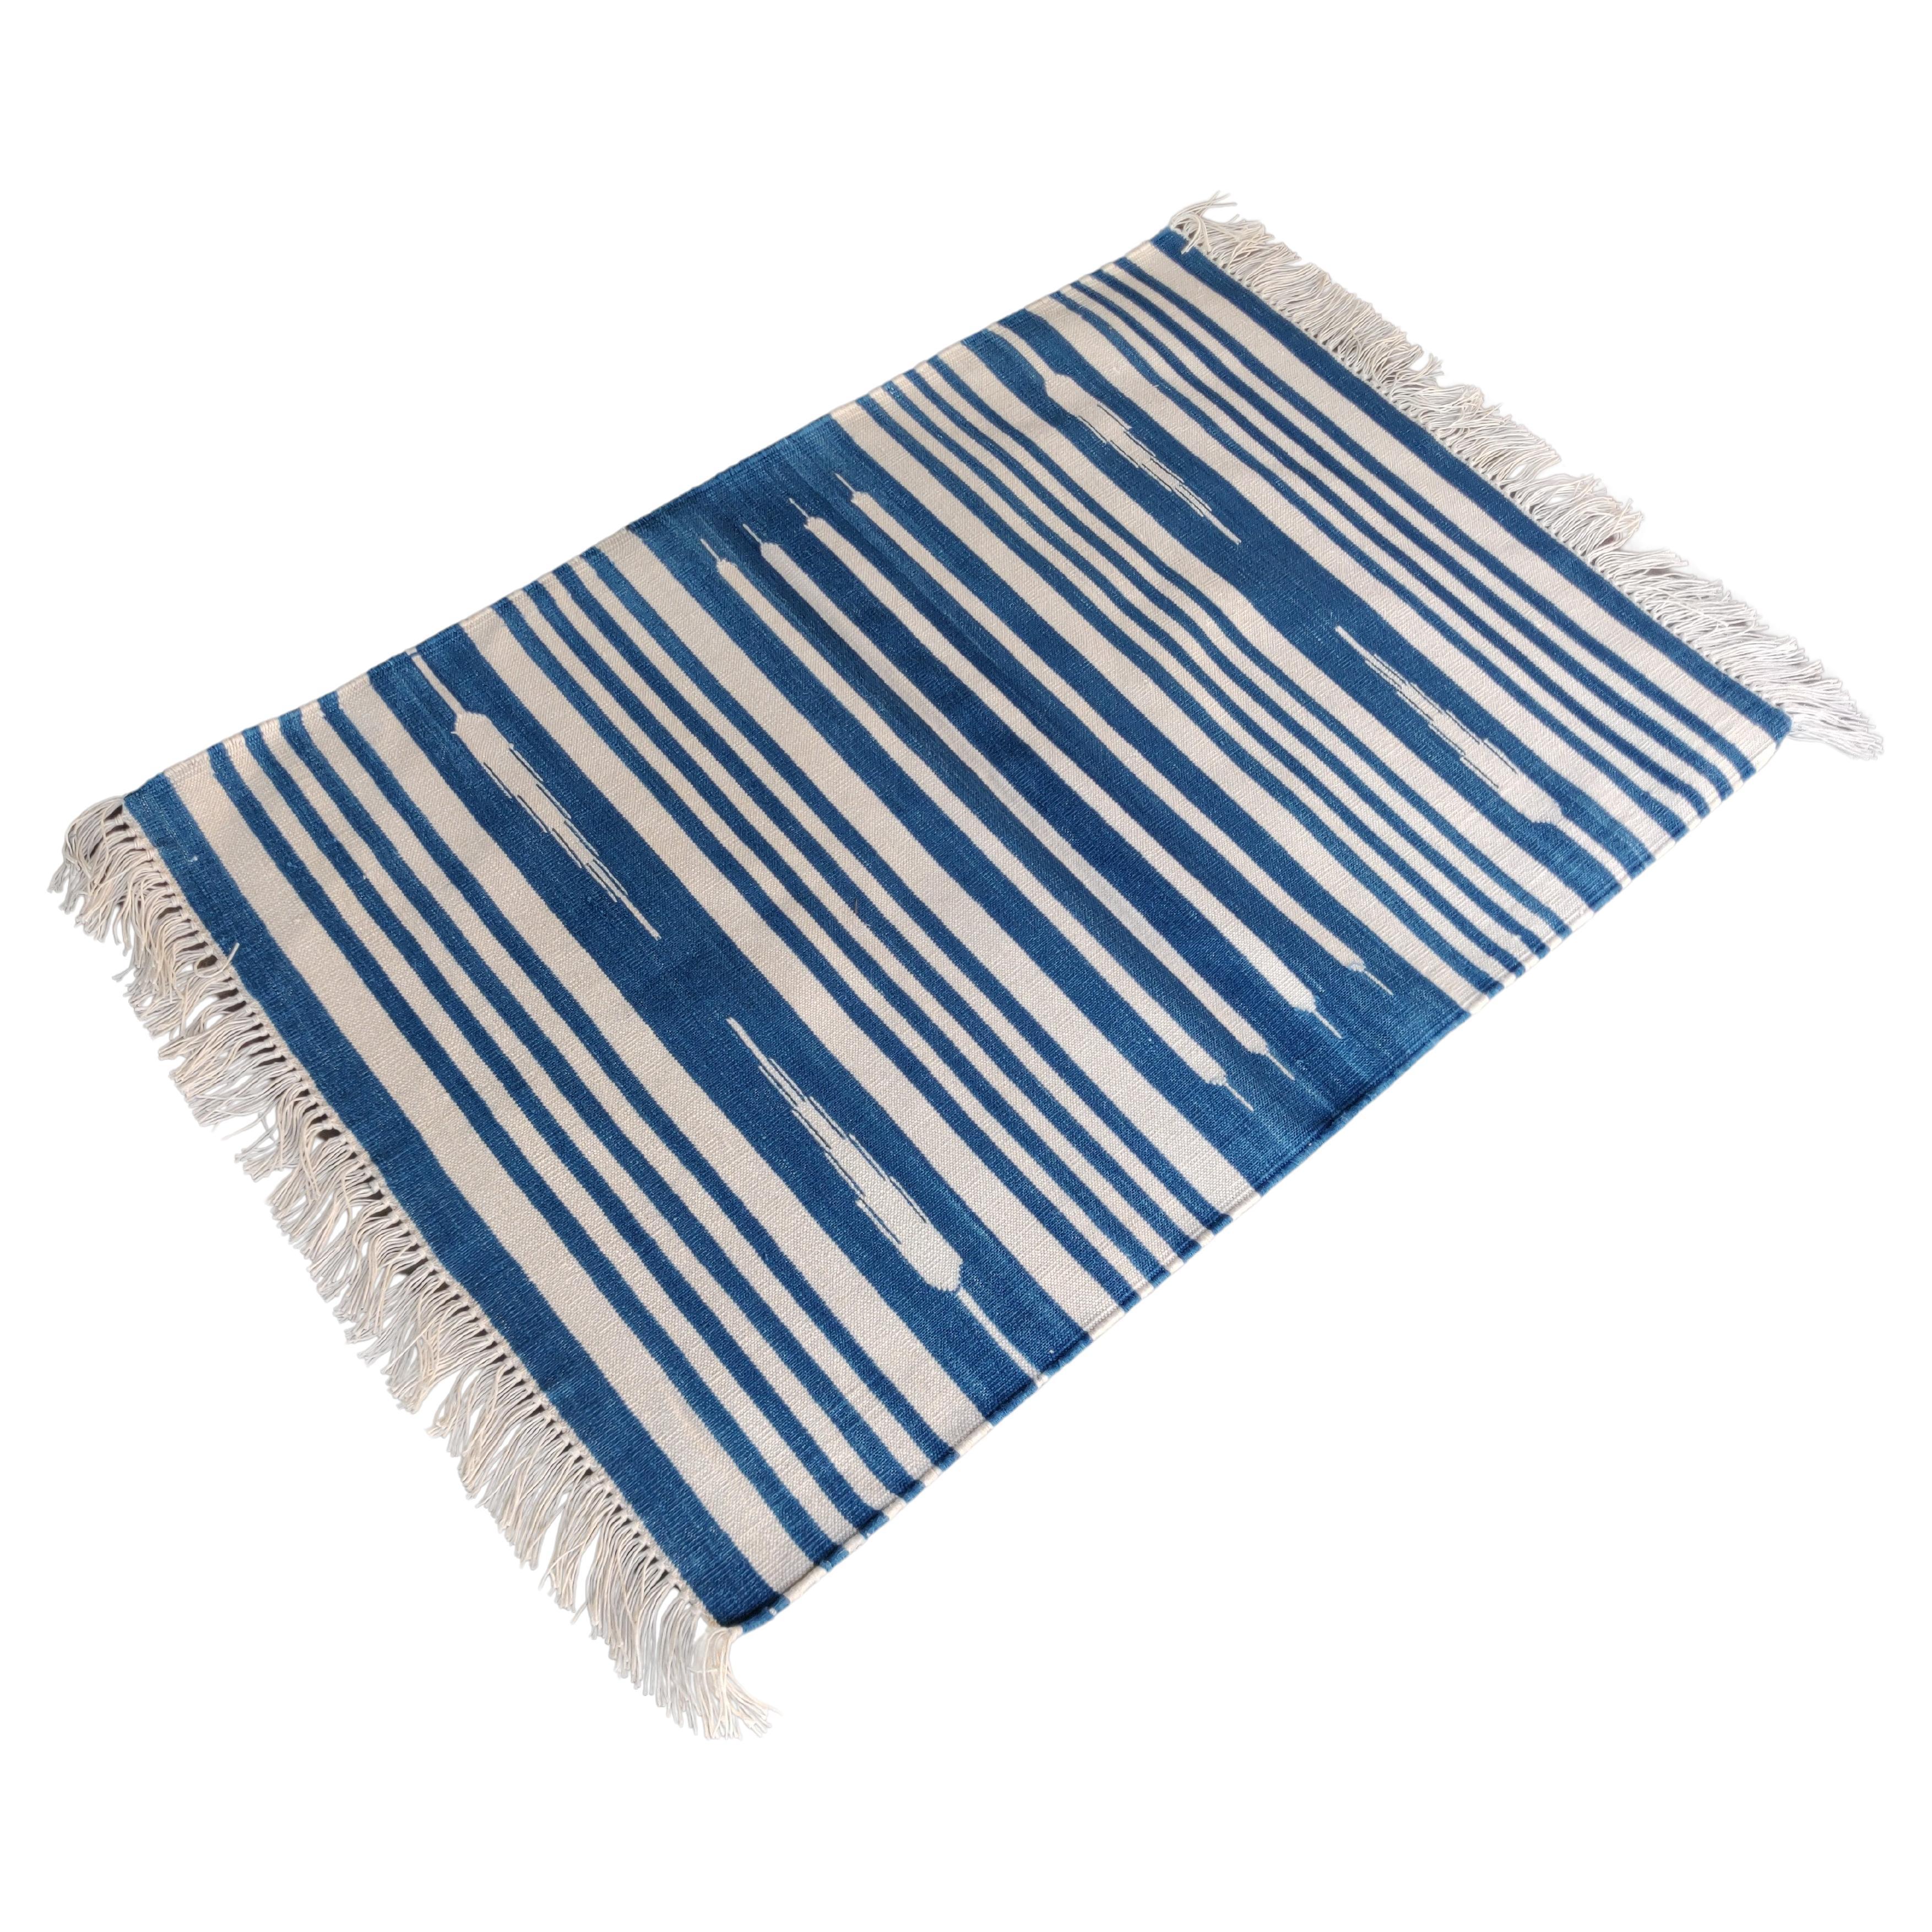 Handmade Cotton Area Flat Weave Rug, 2x3 Blue And White Striped Indian Dhurrie For Sale